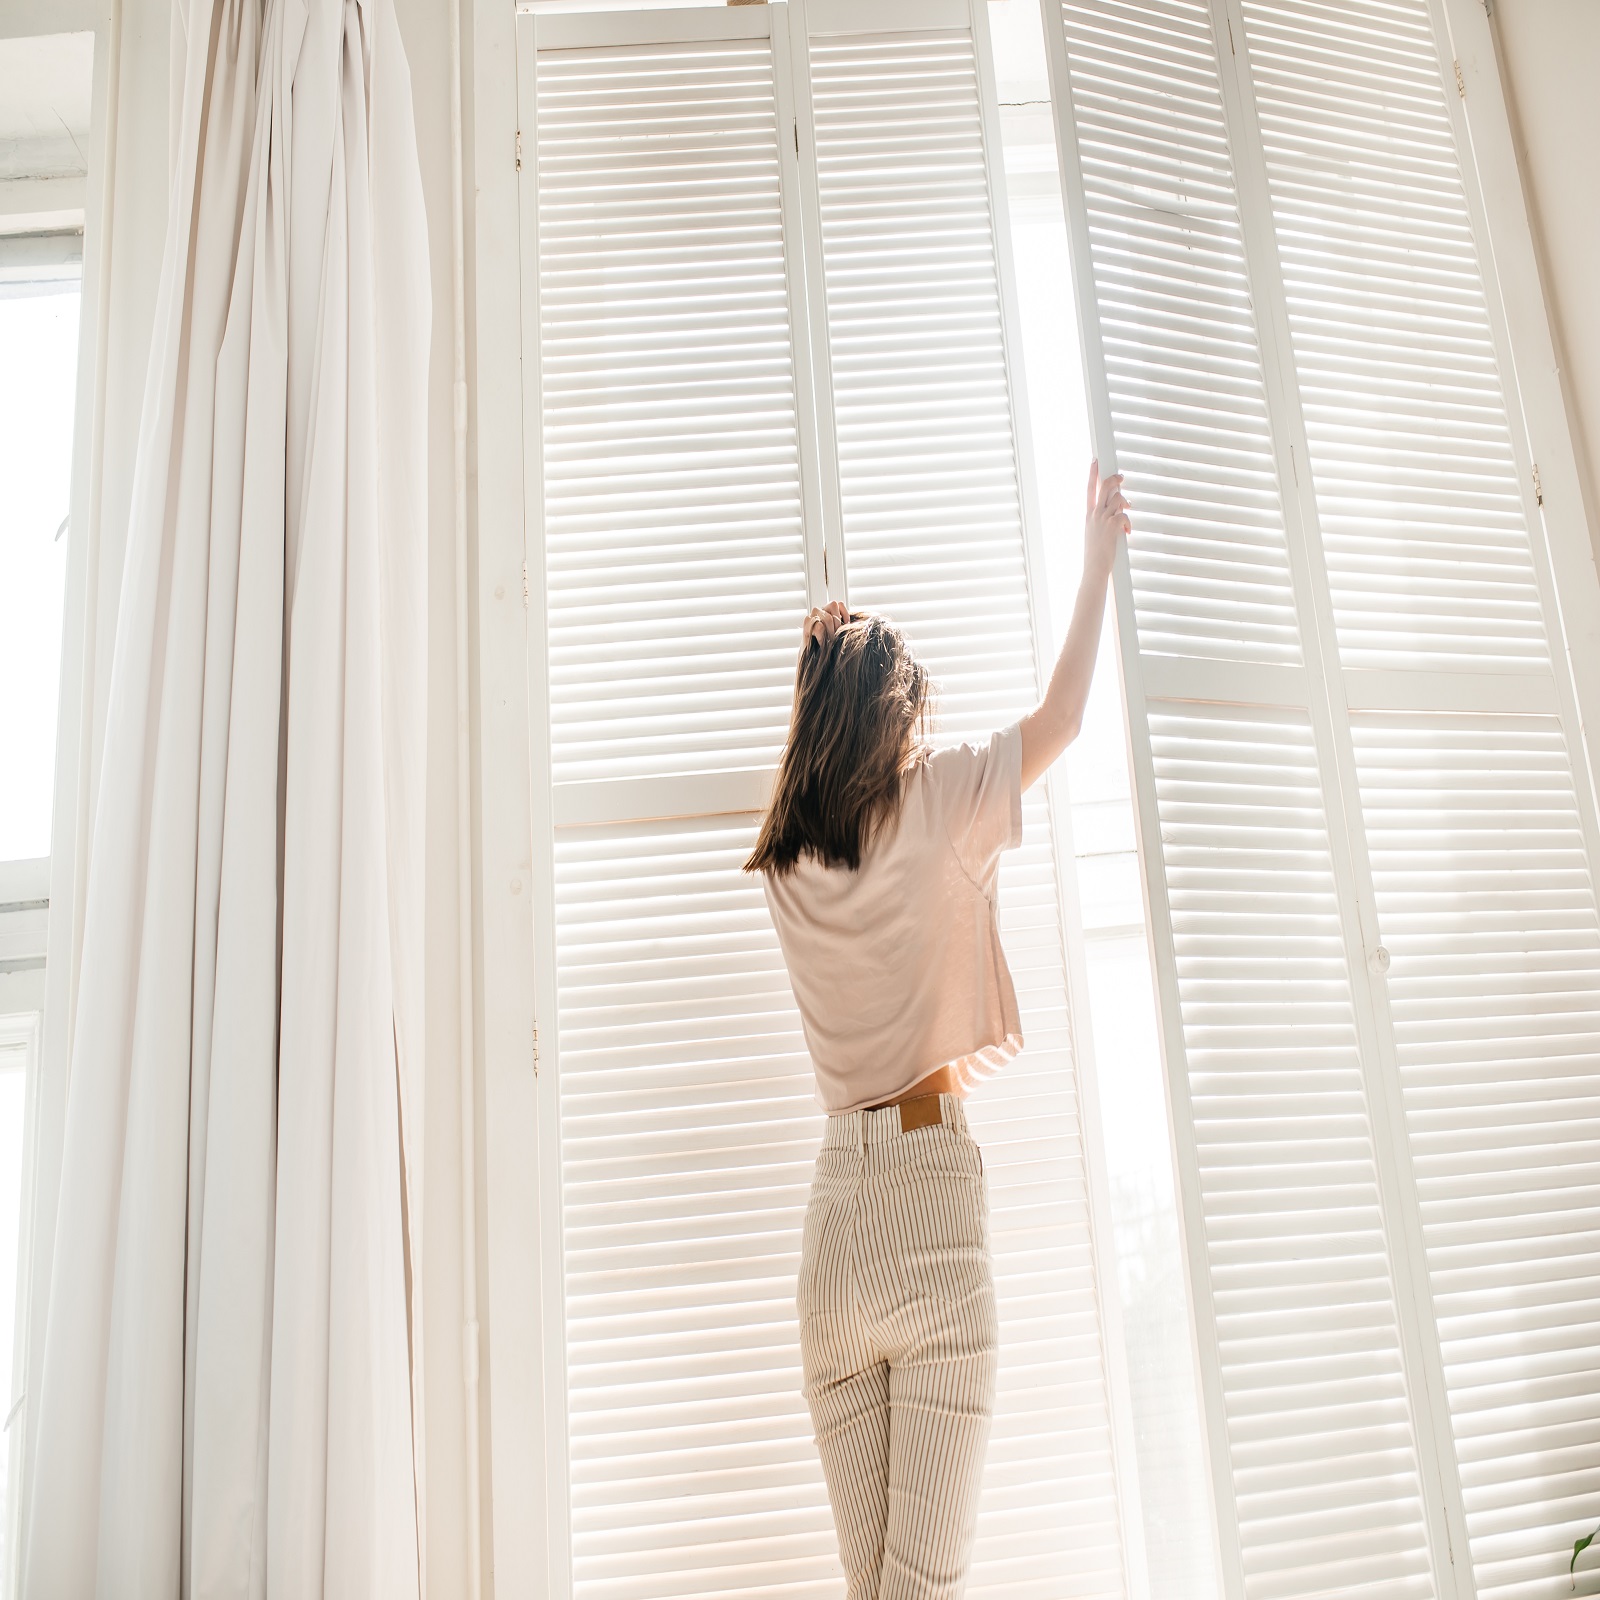 Helping you choose the perfect blinds that are made to last